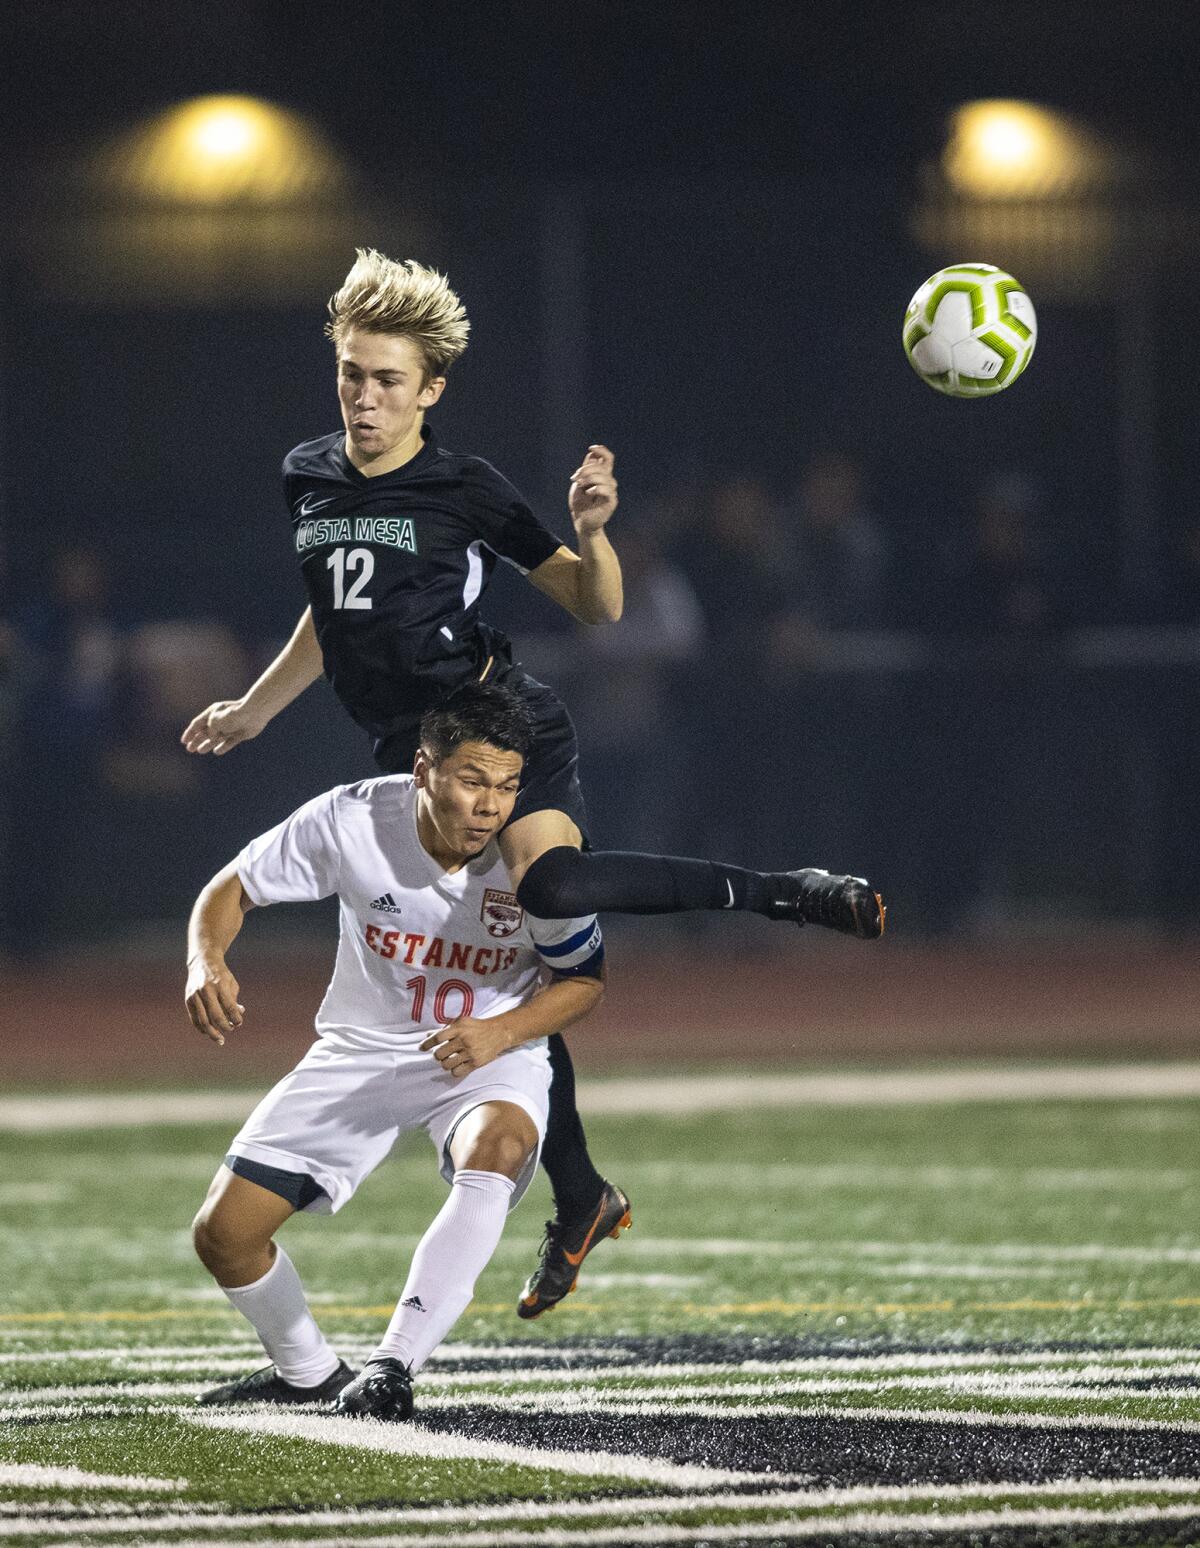 Costa Mesa's Jackson Galitski lands on top of Estancia's Marcos Arreola while going for the ball during an Orange Coast League match on Wednesday.